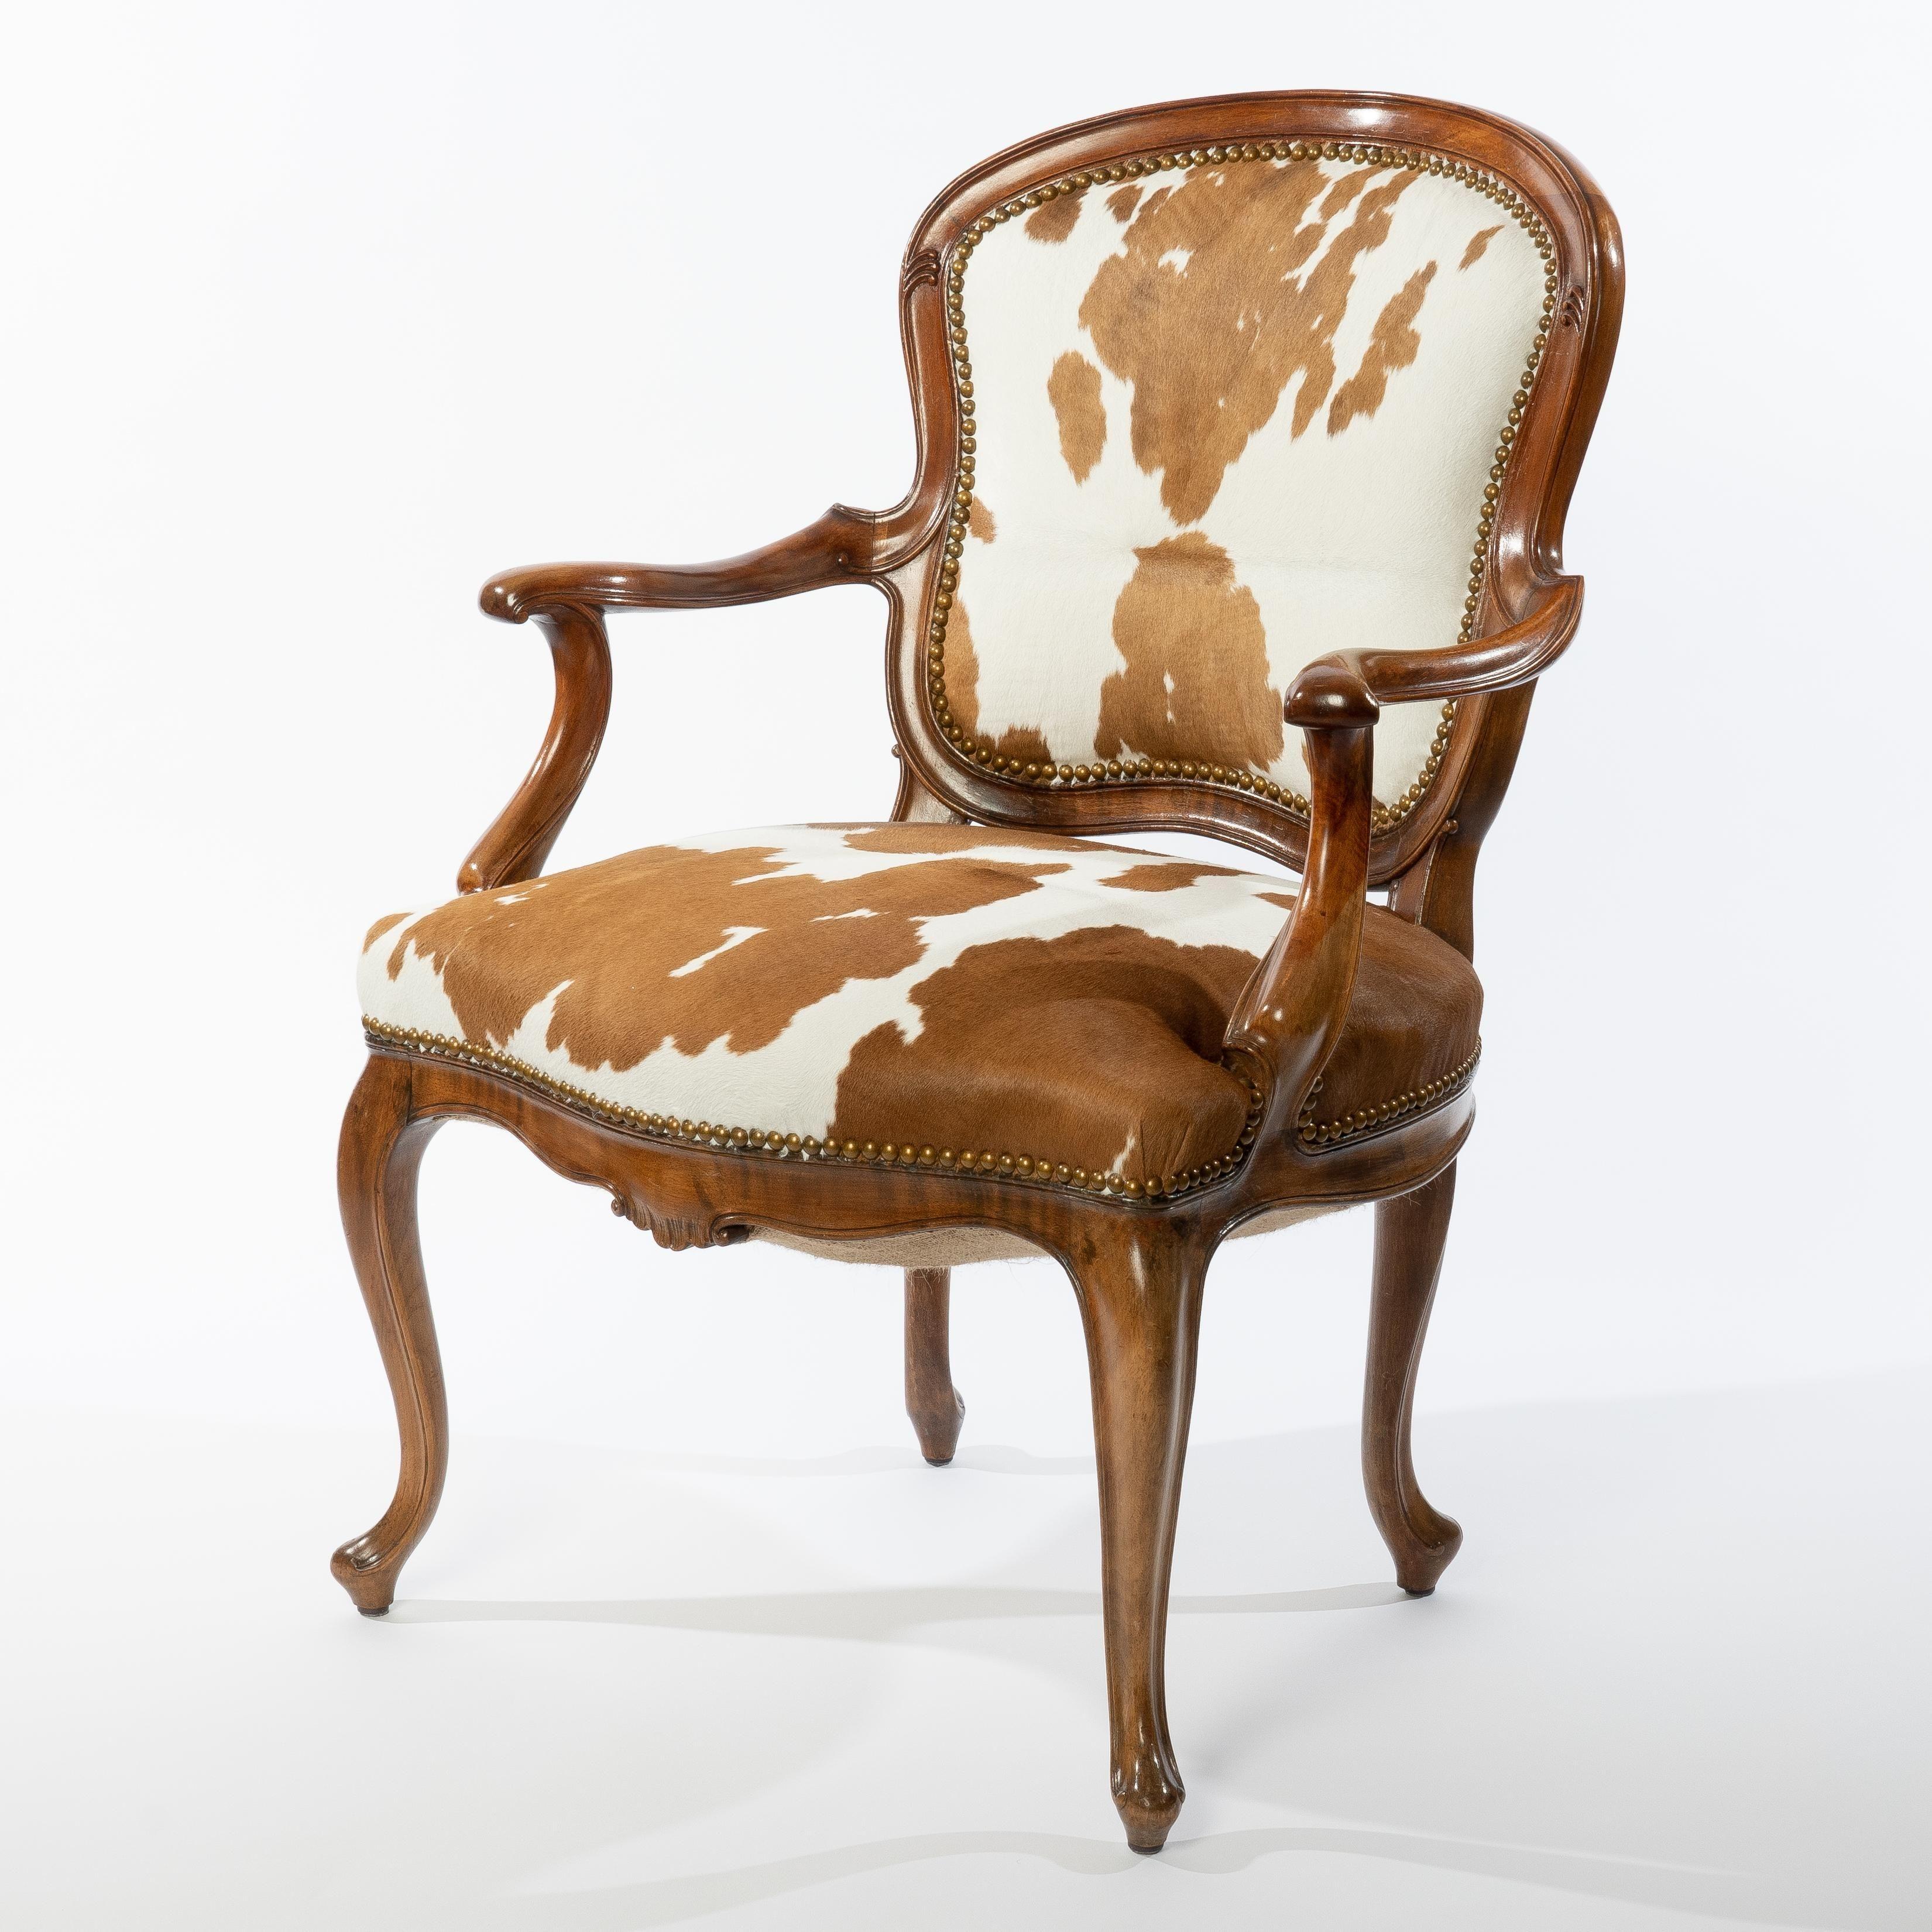 Superbly carved European walnut framed fauteuil in the Louis XVI taste. Back and seat have been re-webbed, filled, and upholstered in hair-on-hide calf skin with brass tacks. The exterior back is covered in a tan and white cotton gingham